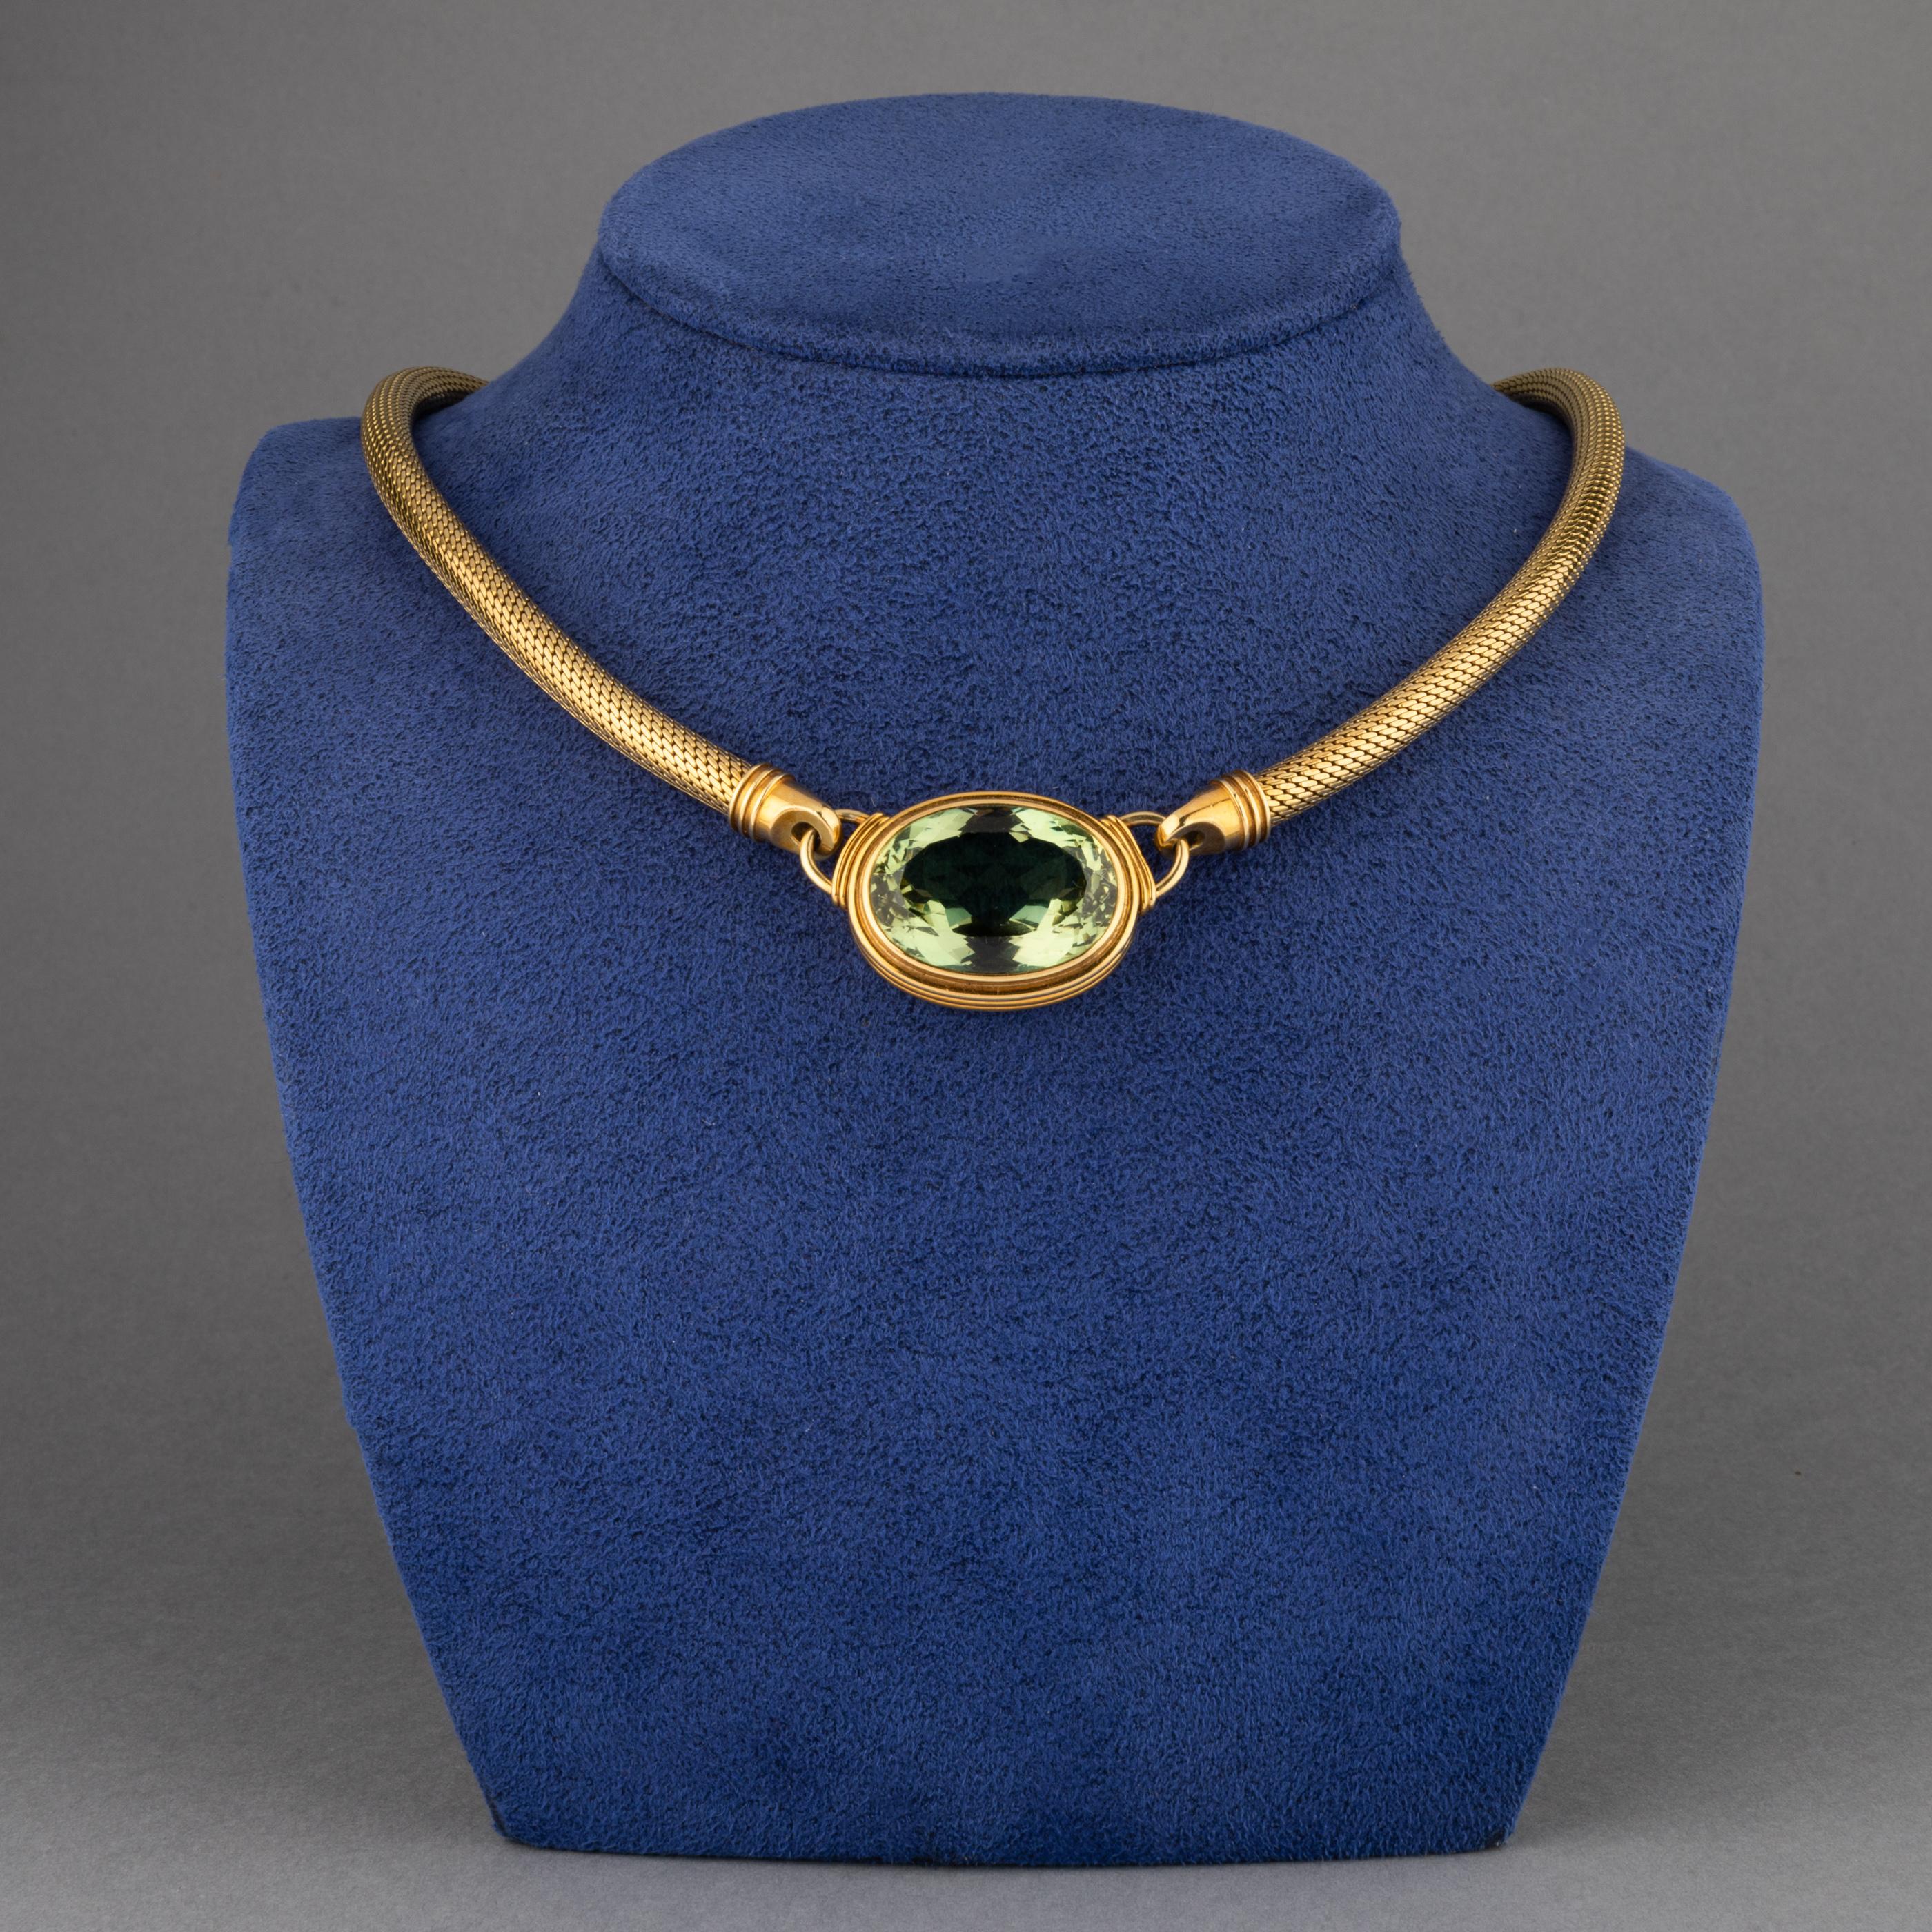 Elegant vintage necklace, made by Gübelin circa 1945.
Made in yellow gold 18k and set with a beautiful and big Peridot of 30 carats estimate.
Mark for gold: the owl, mark of the maker.
The size is 42 cm for the lengh.
The width is 6mm.
The Stone